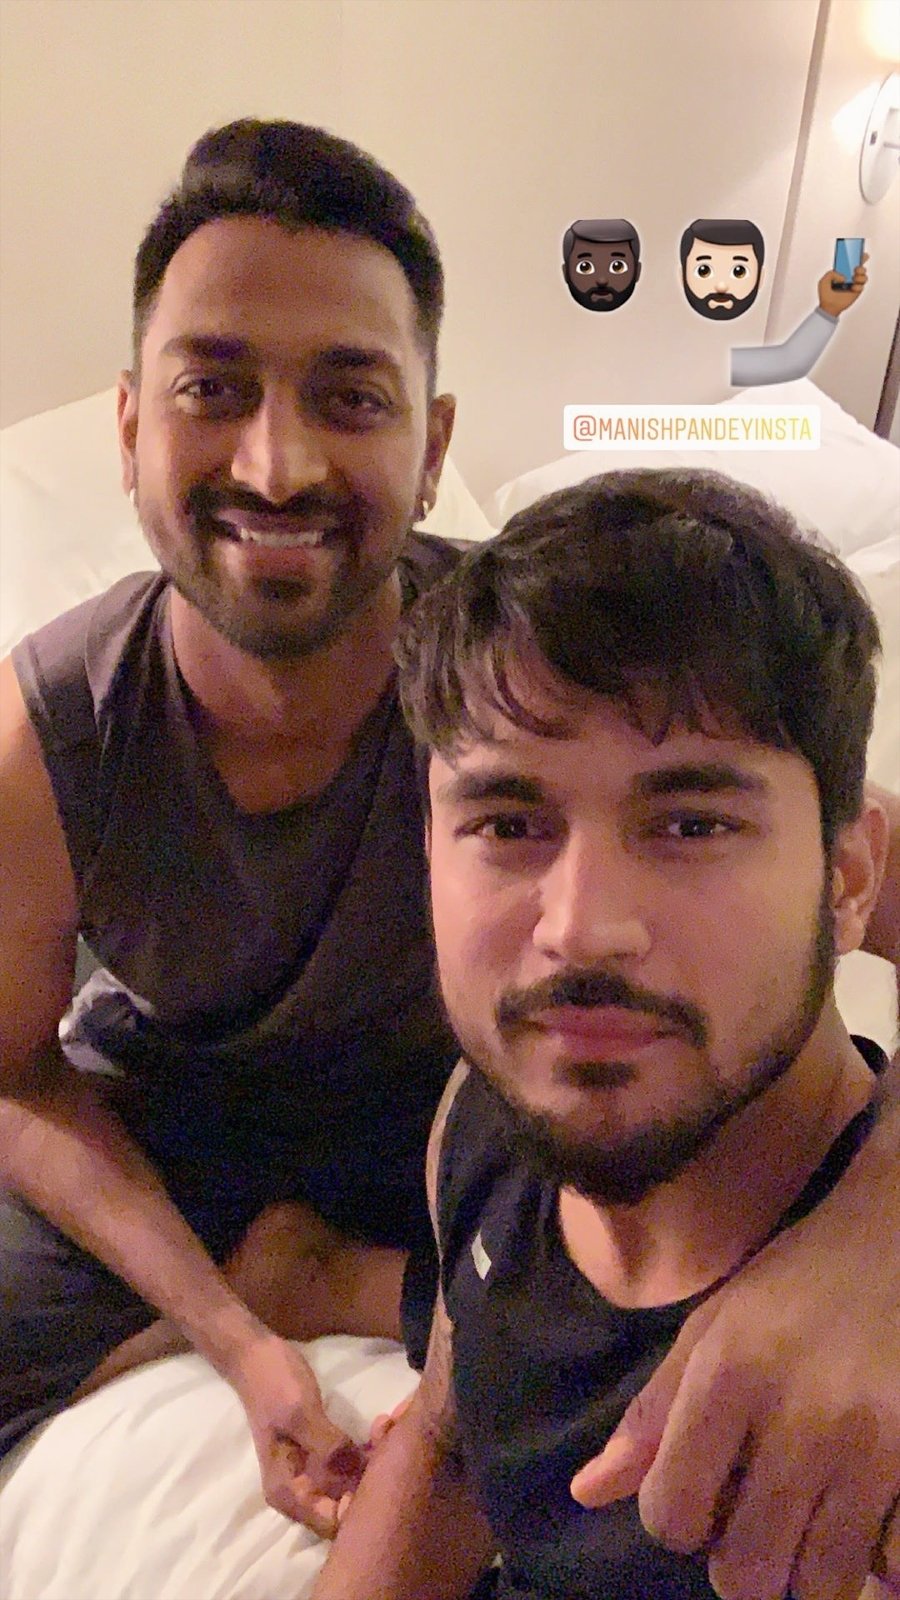 See the latest posts and news about manish pandey in the Cricket world